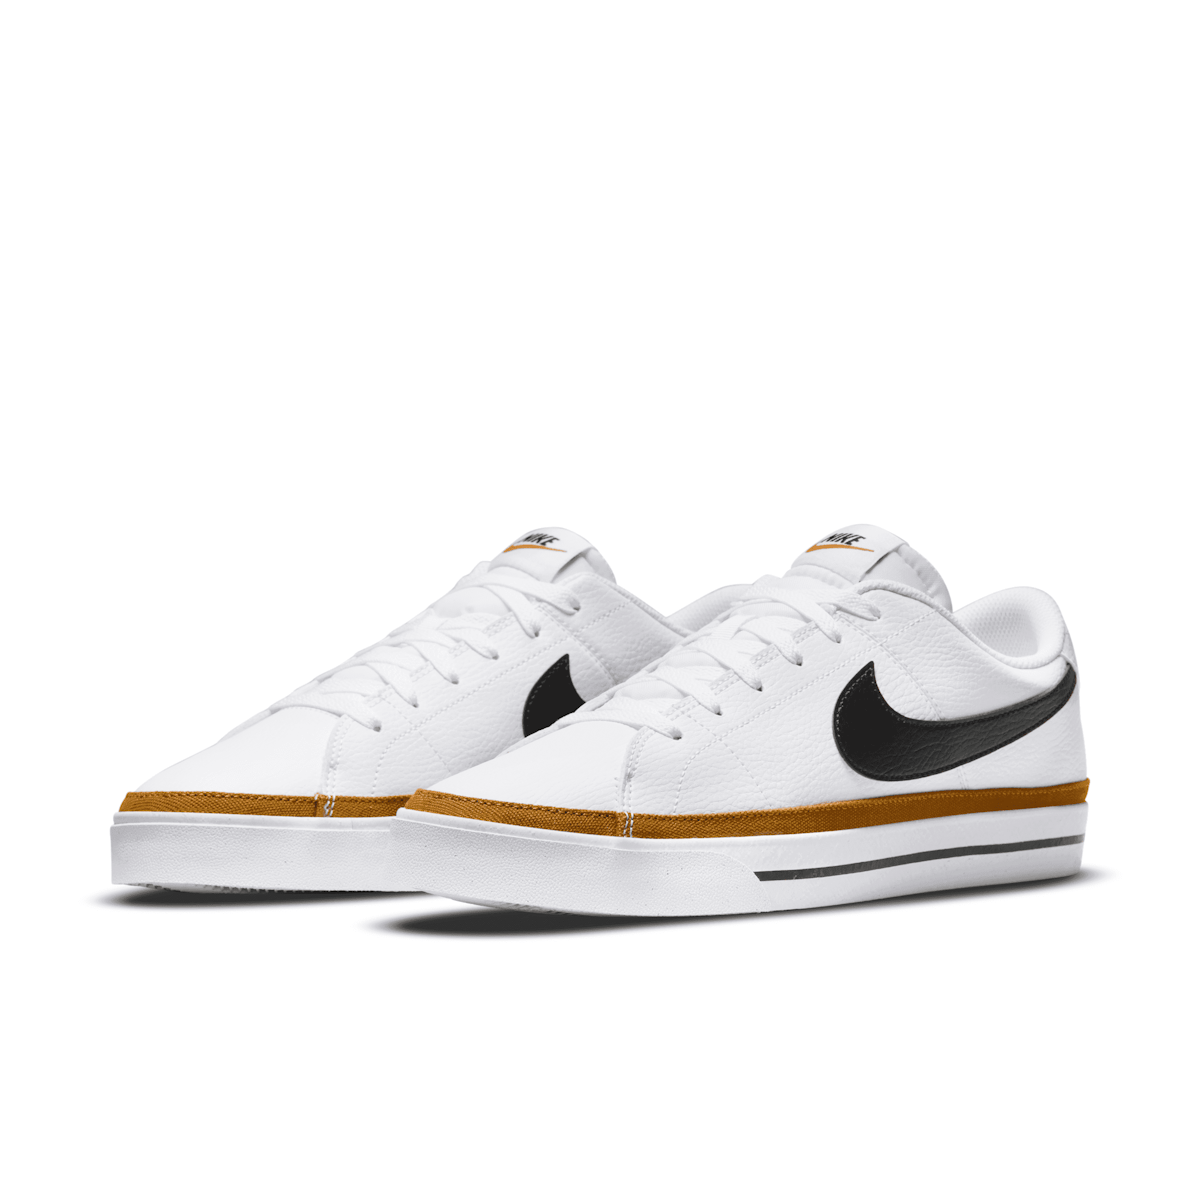 Nike Court Legacy Shoes in and - Raffles White DH3162-100 Date Release